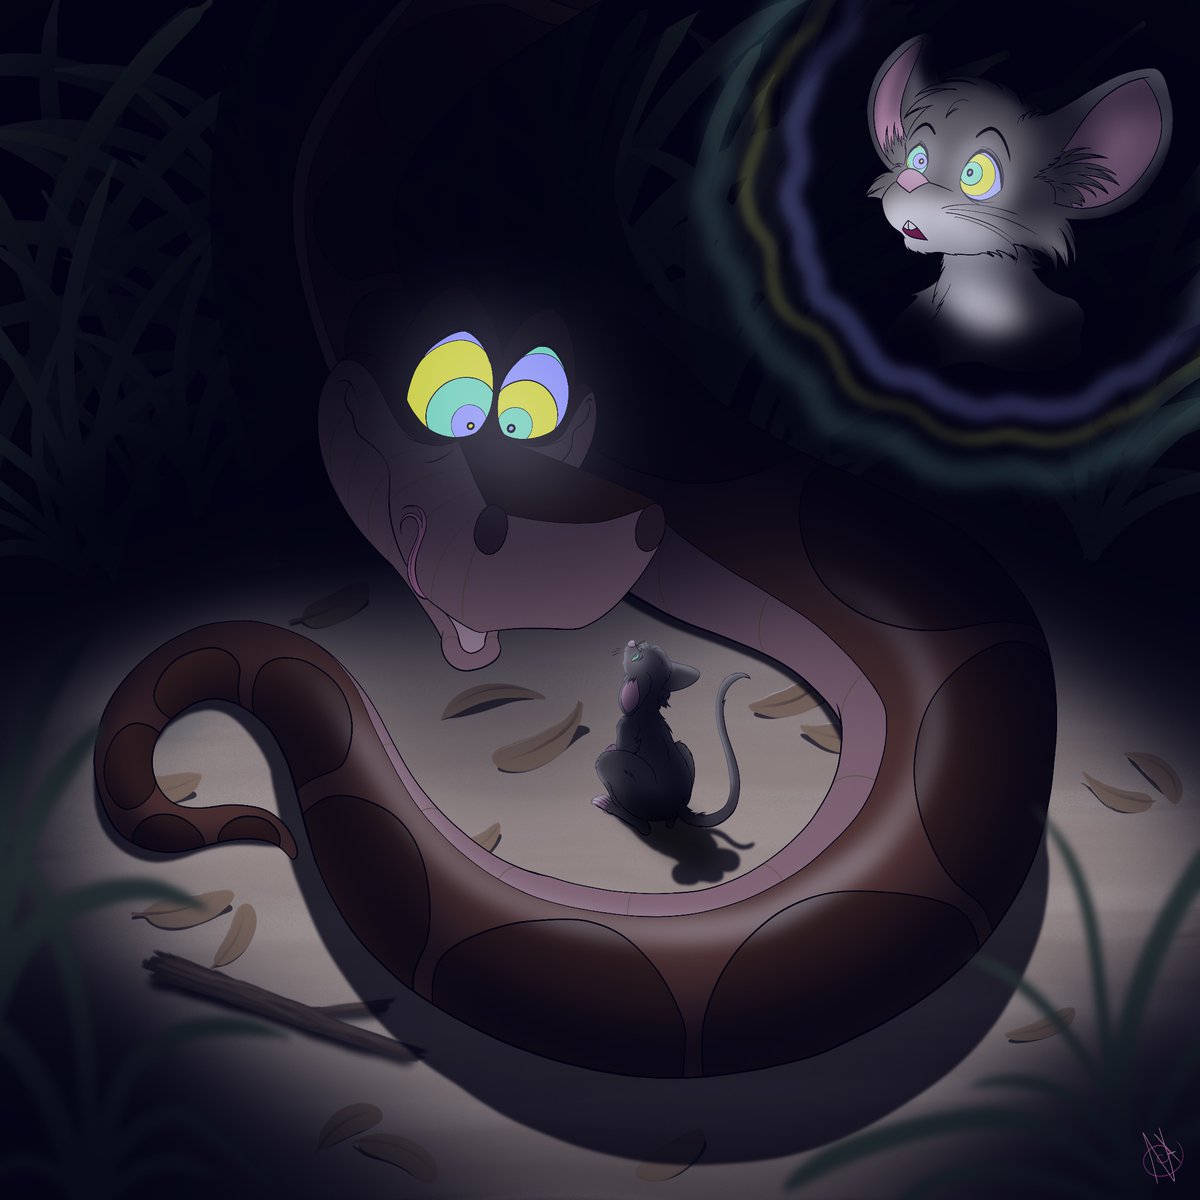 Still remember the feeling of being a kid, lights off, my eyes glued to the TV, and utterly captivated by this silly, but charming noodle. Perhaps not too different of a feeling from what this helpless little mouse seems to be experiencing in the moment. Happy #KaaDay everyone!